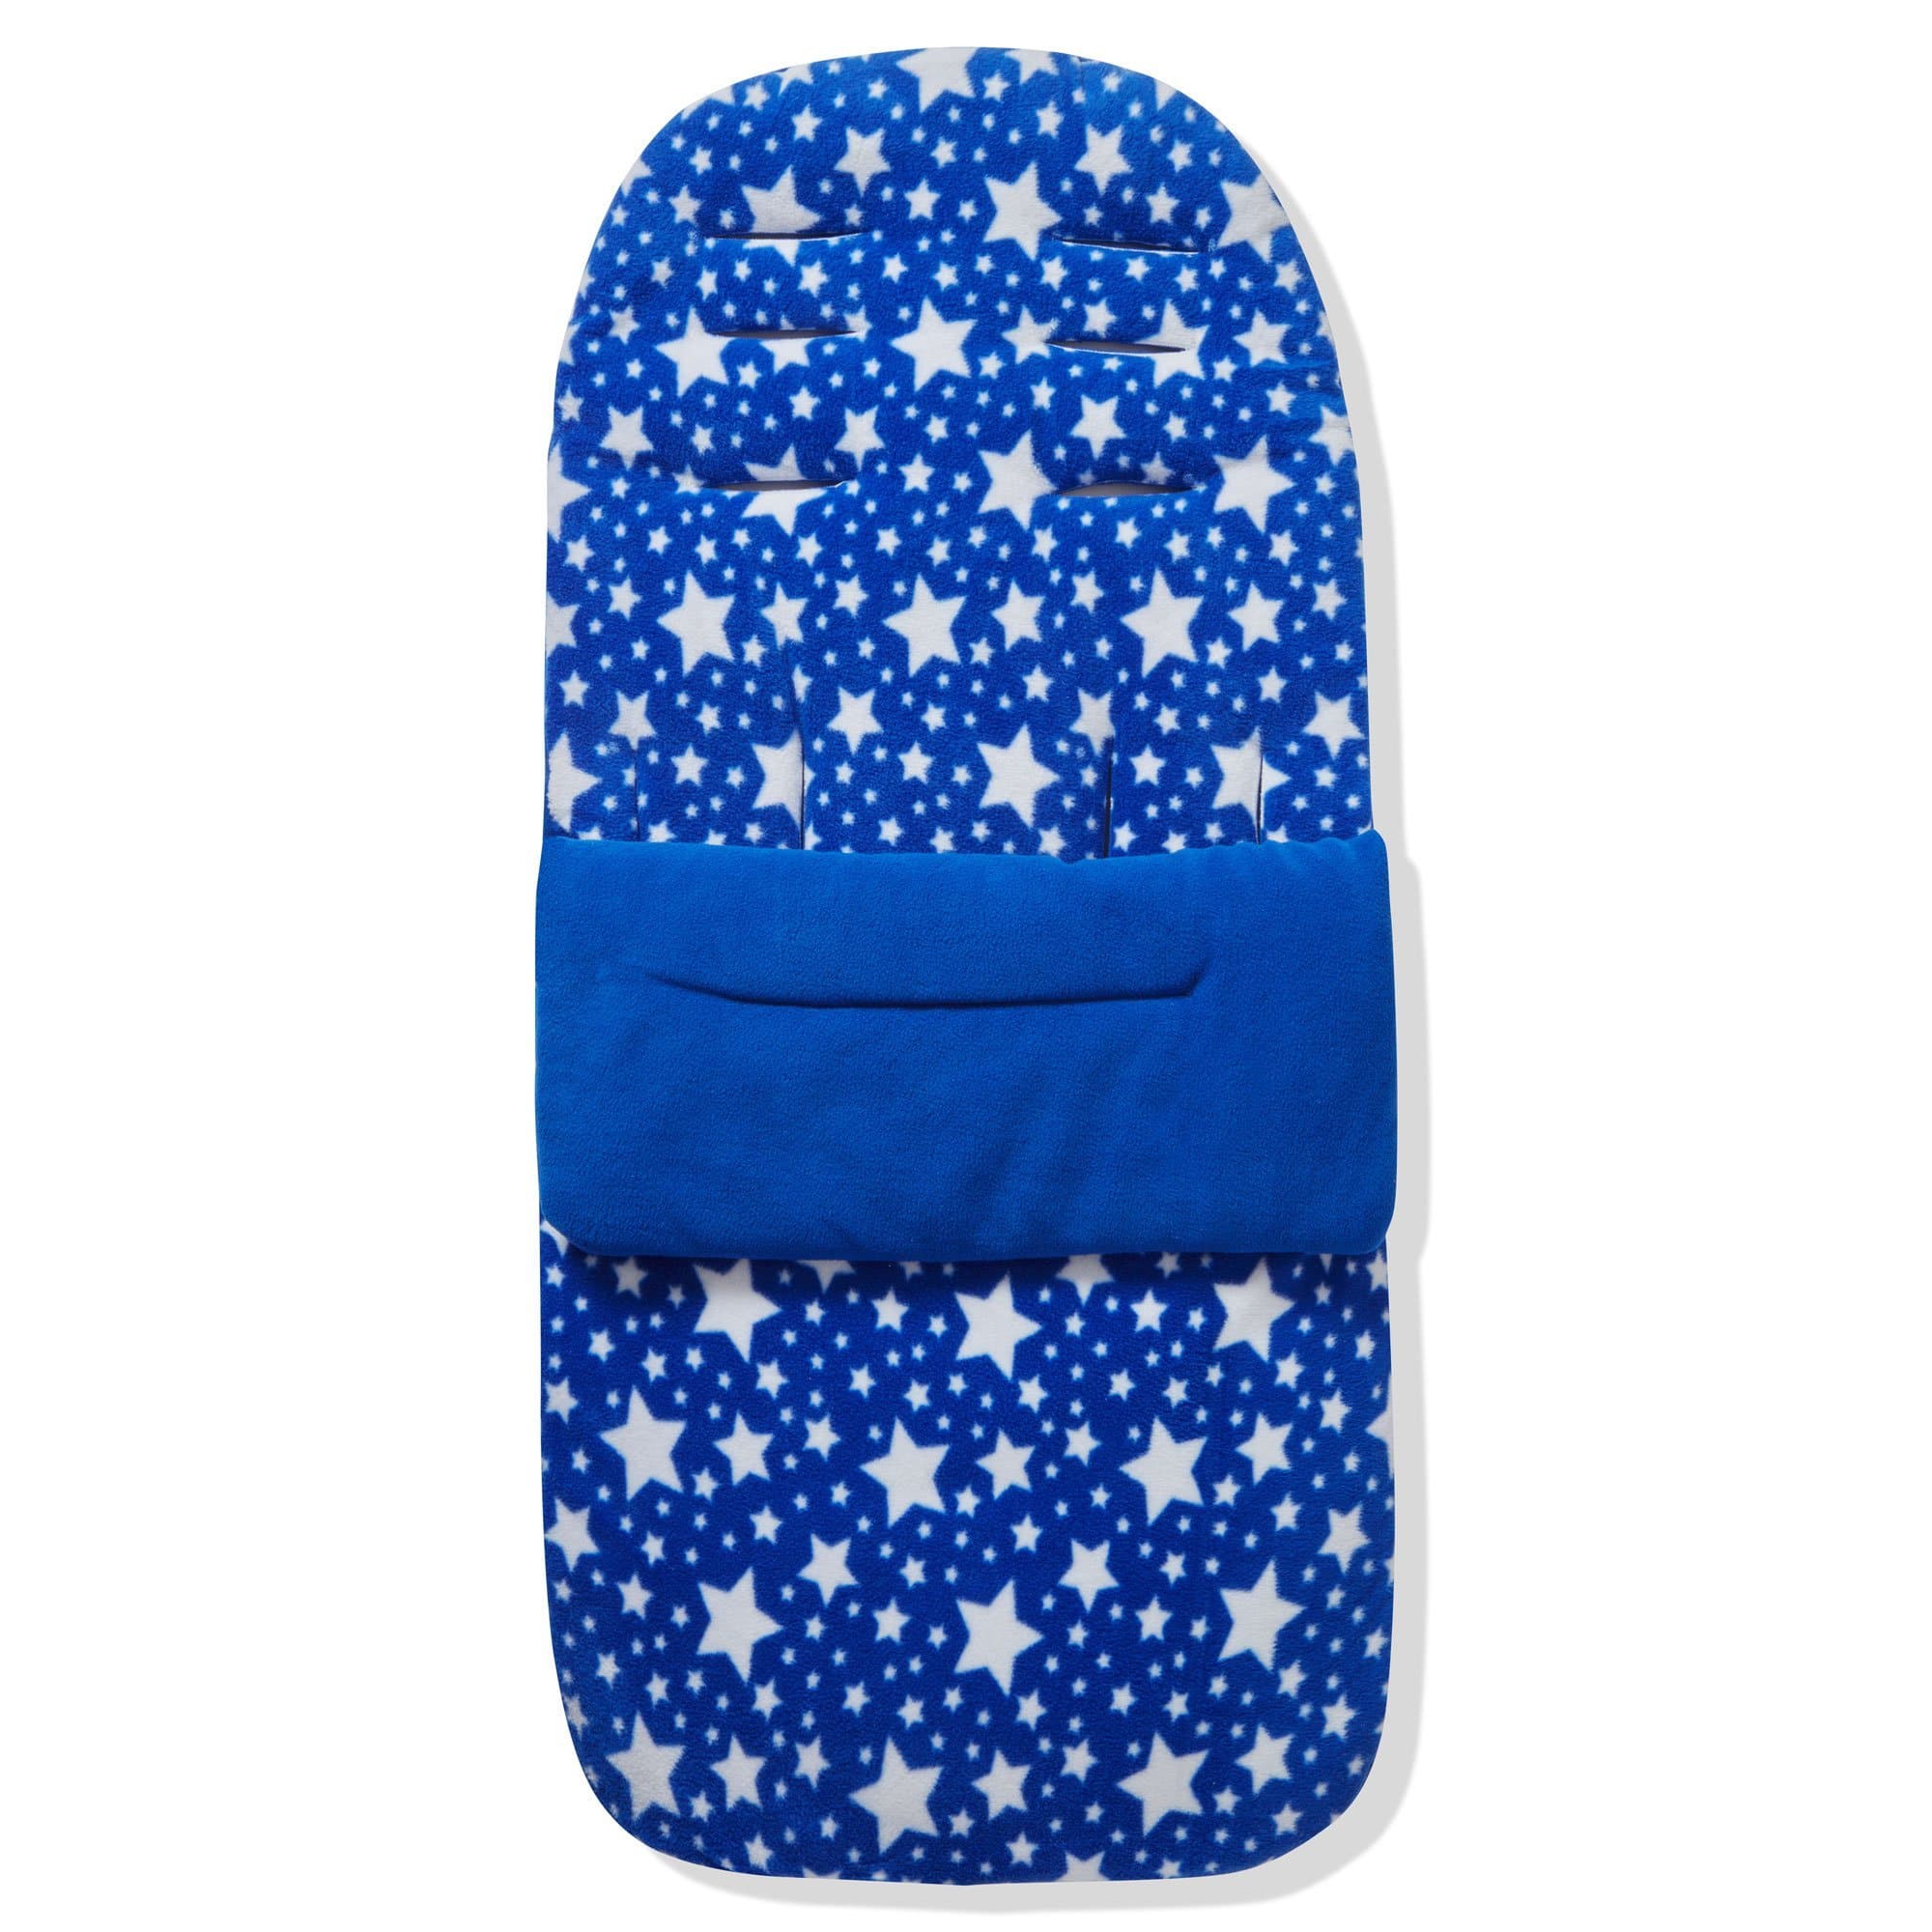 Fleece Footmuff / Cosy Toes Compatible With Baby Weavers - Blue Star / Fits All Models | For Your Little One